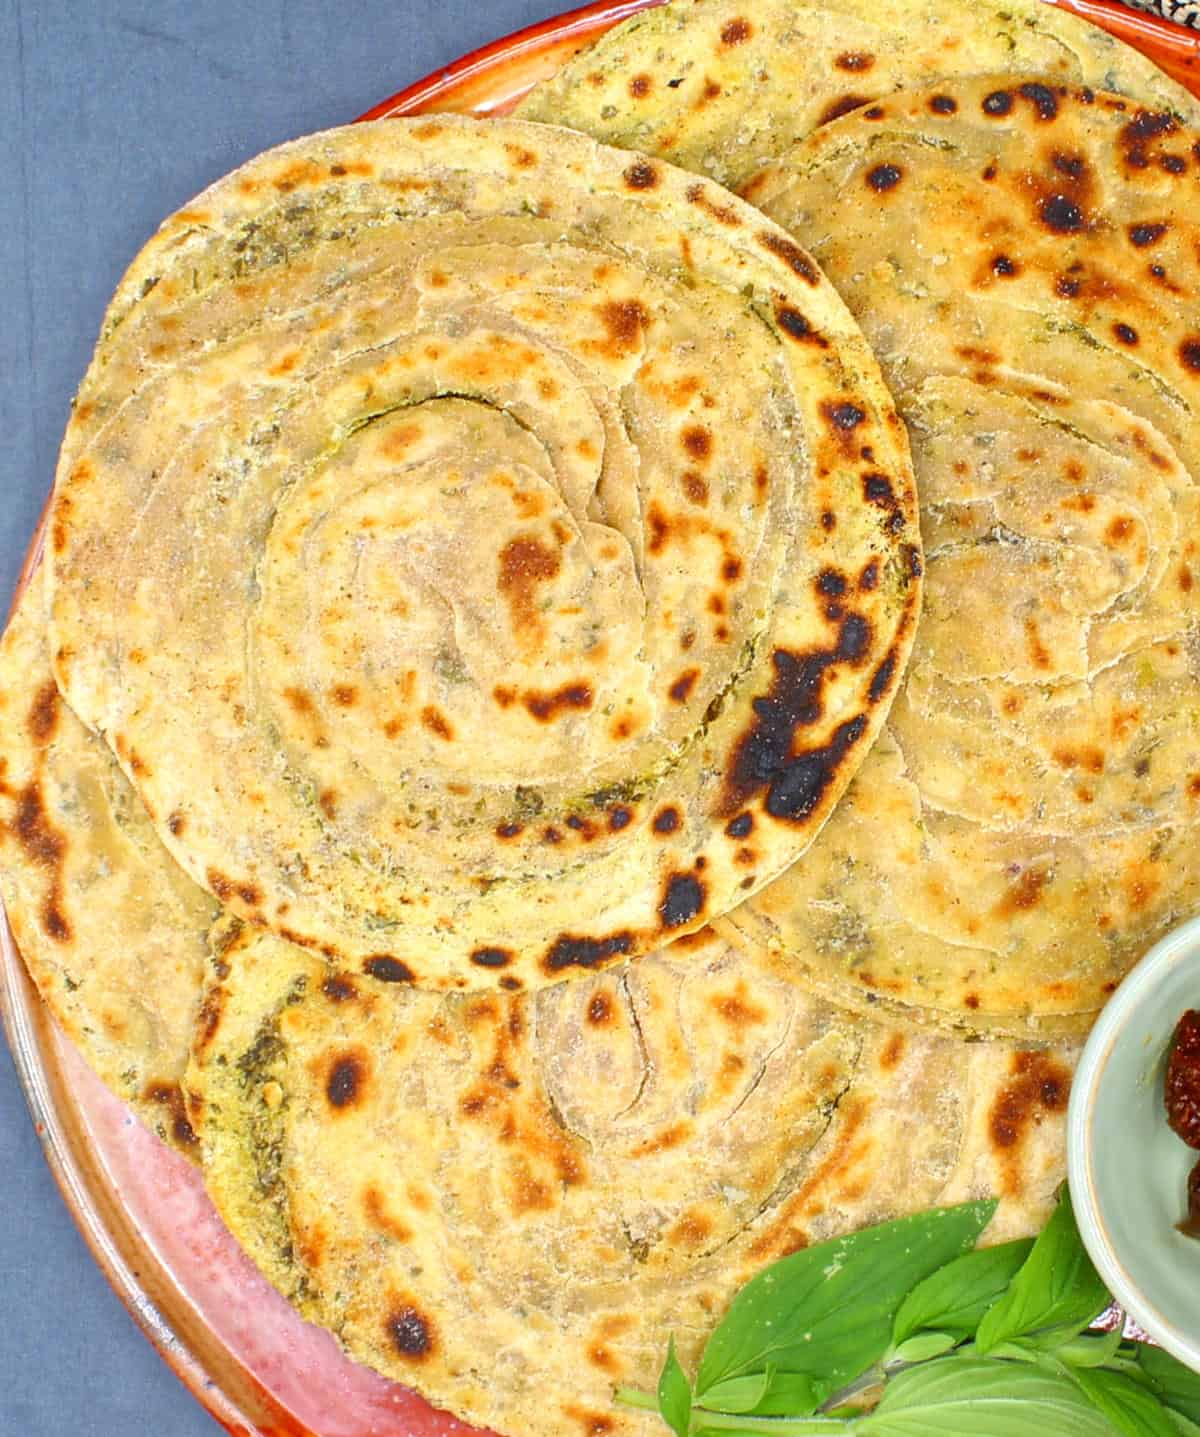 Pudina parathas on an earthen plate with pickles and mint leaves.